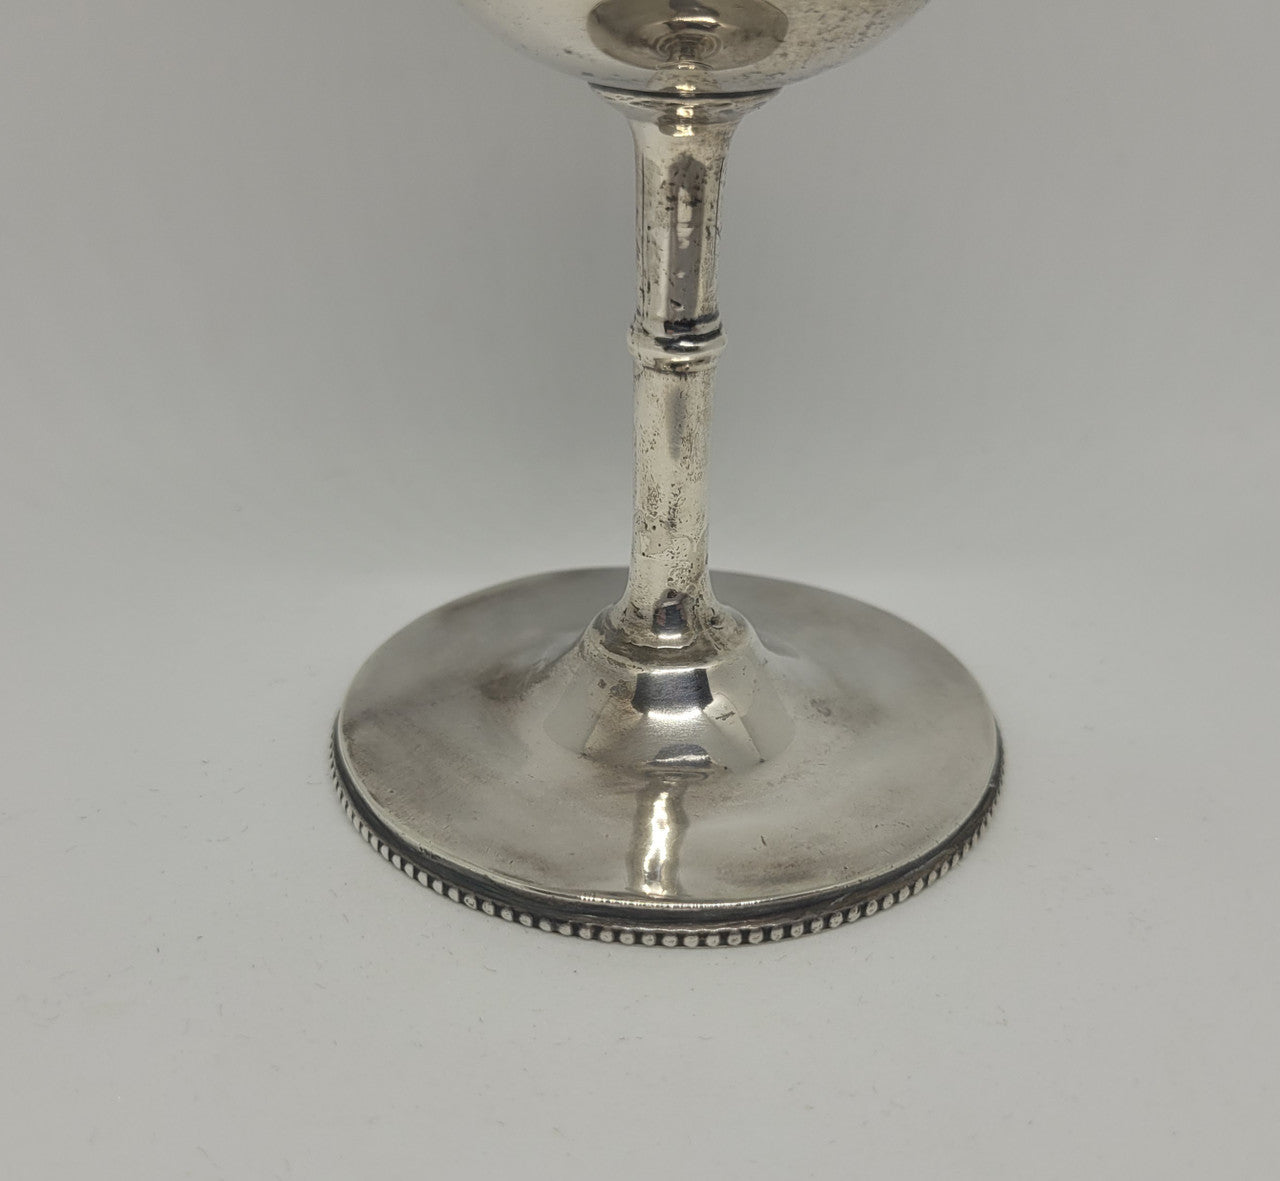 Unique Sterling Silver Christening Goblet With Repousse Motifs. Sheffield 1891. In very good original condition. Initials CJOB on one panel.